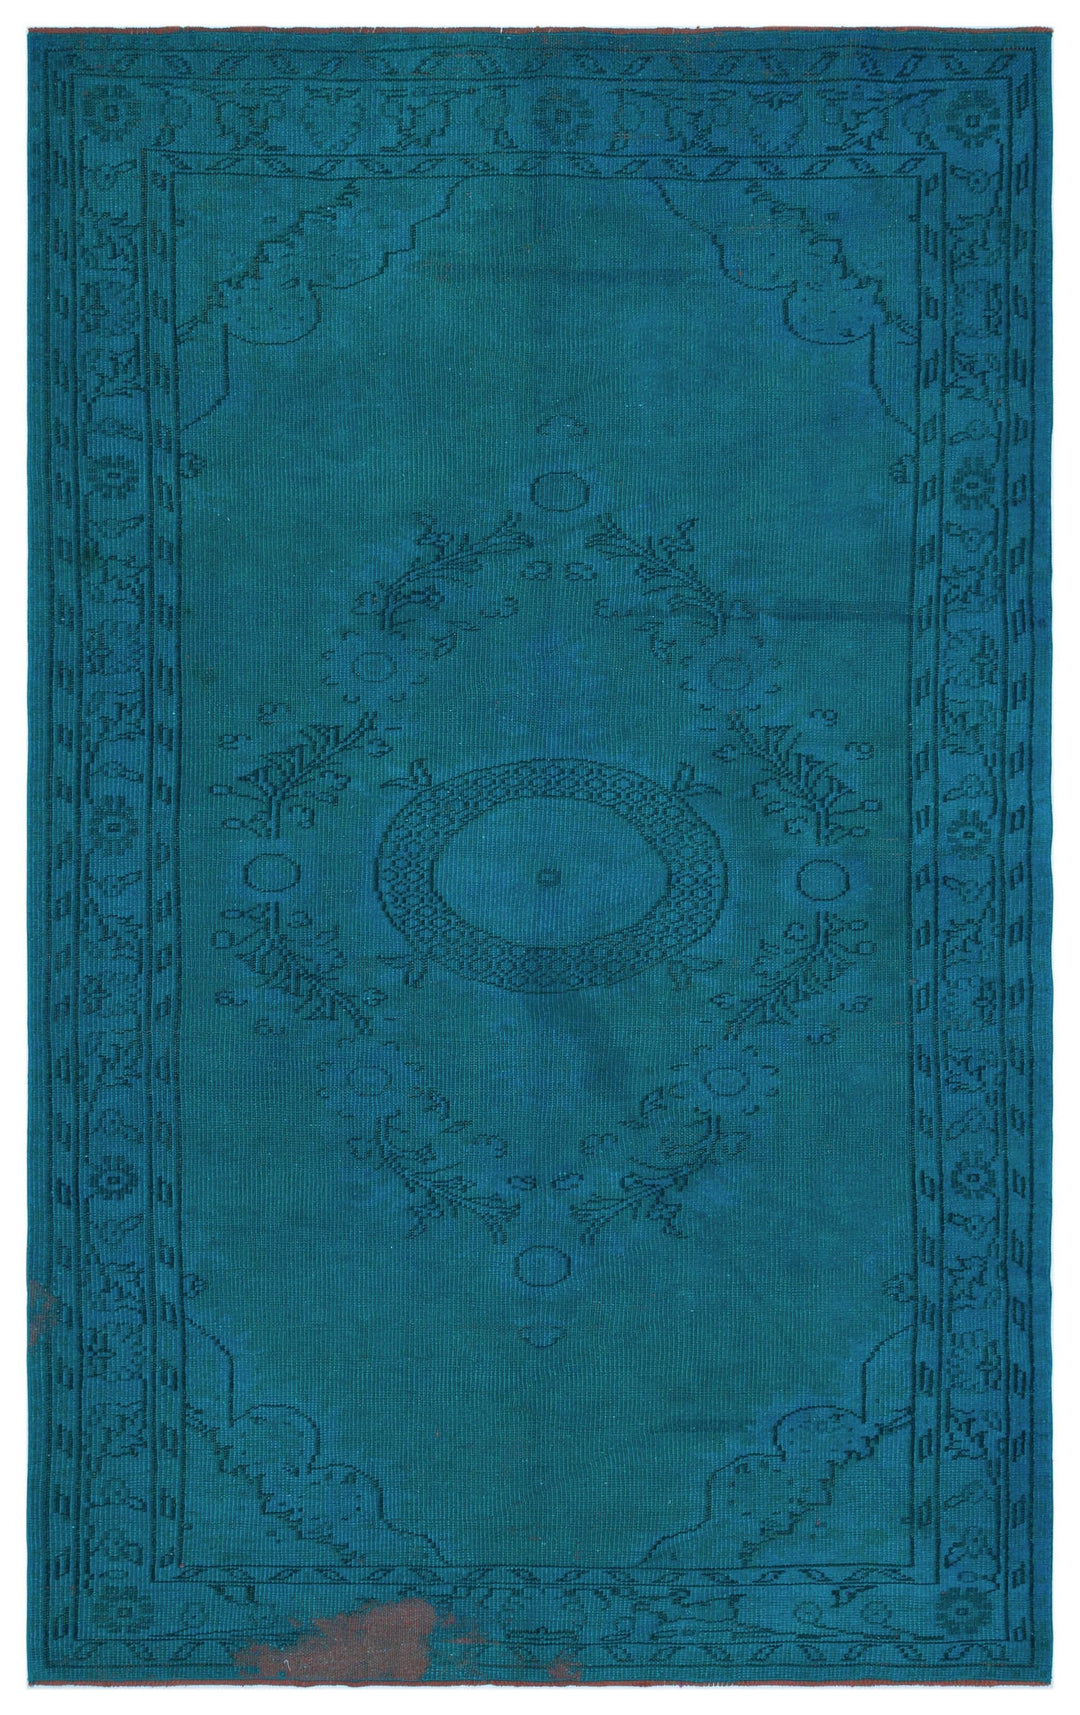 Athens Turquoise Tumbled Wool Hand Woven Carpet 170 x 273